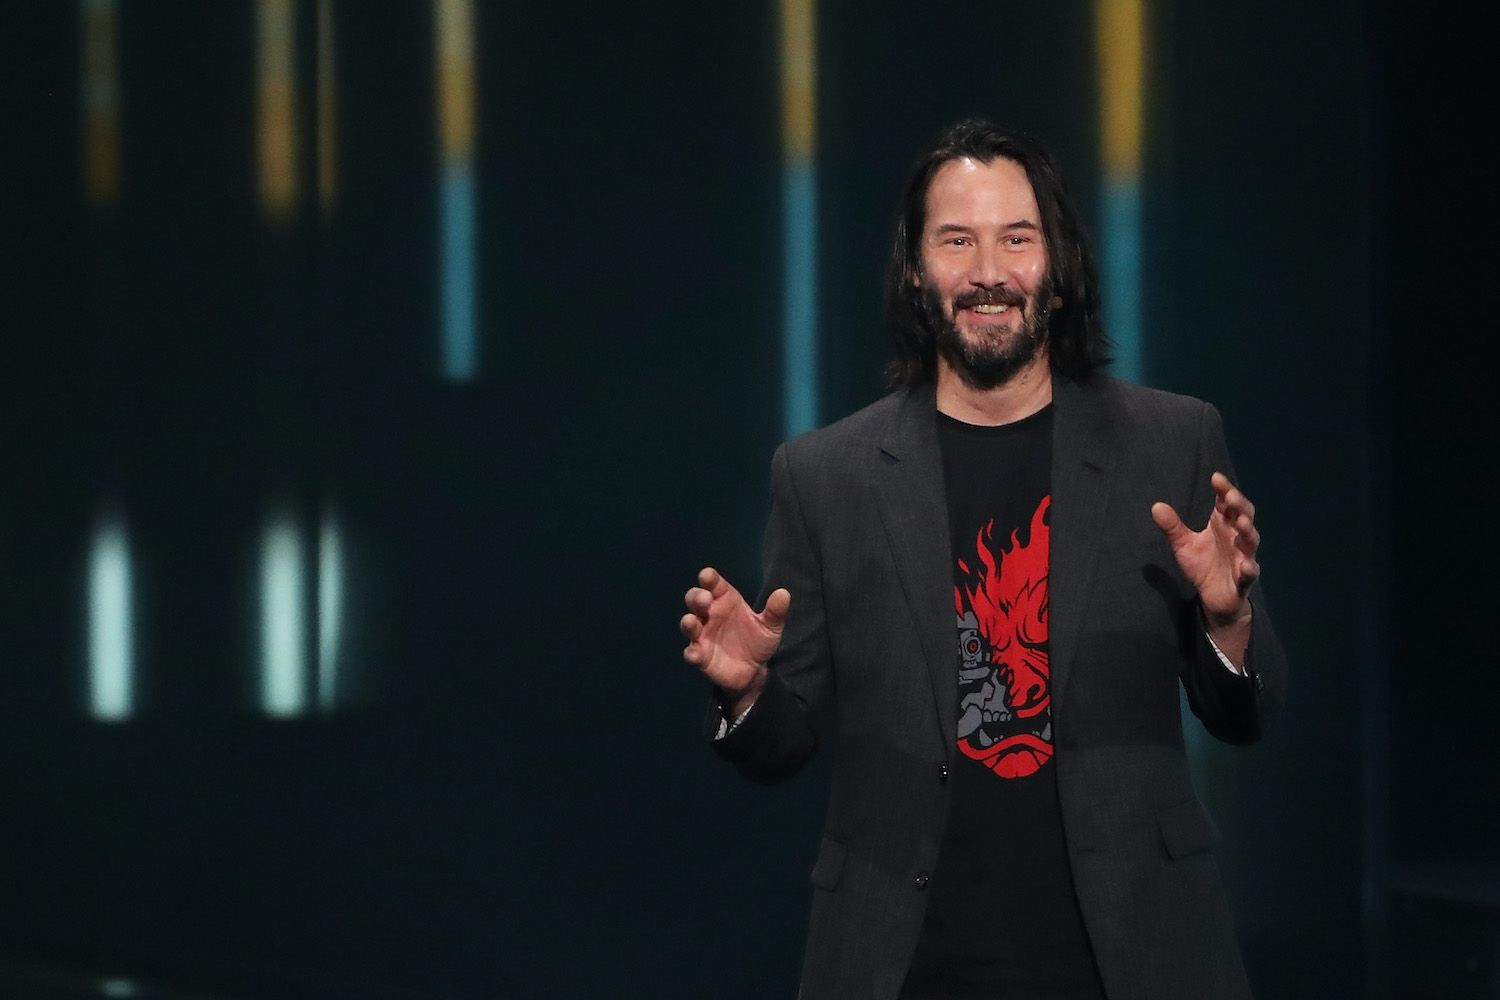 Keanu Reeves speaks about Cyberpunk 2077 from developer CD Projekt Red during the Xbox E3 2019 Briefing